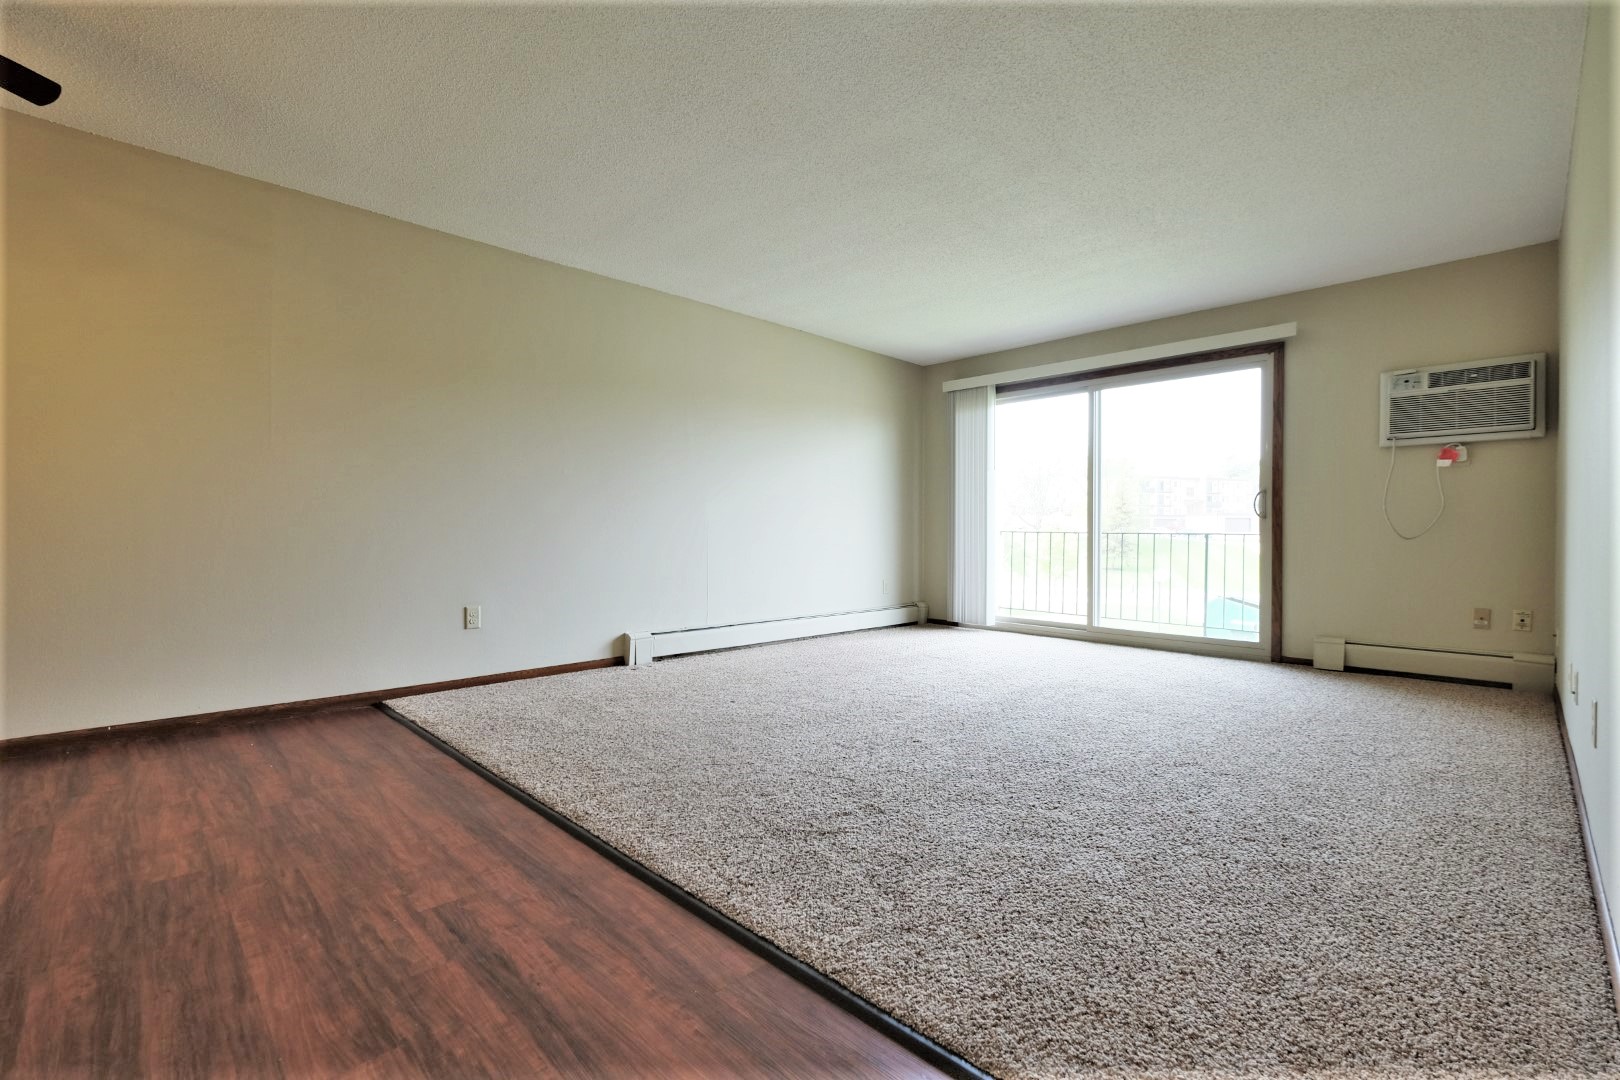 Sumter Green apartment living area with carpet and vinyl plank flooring